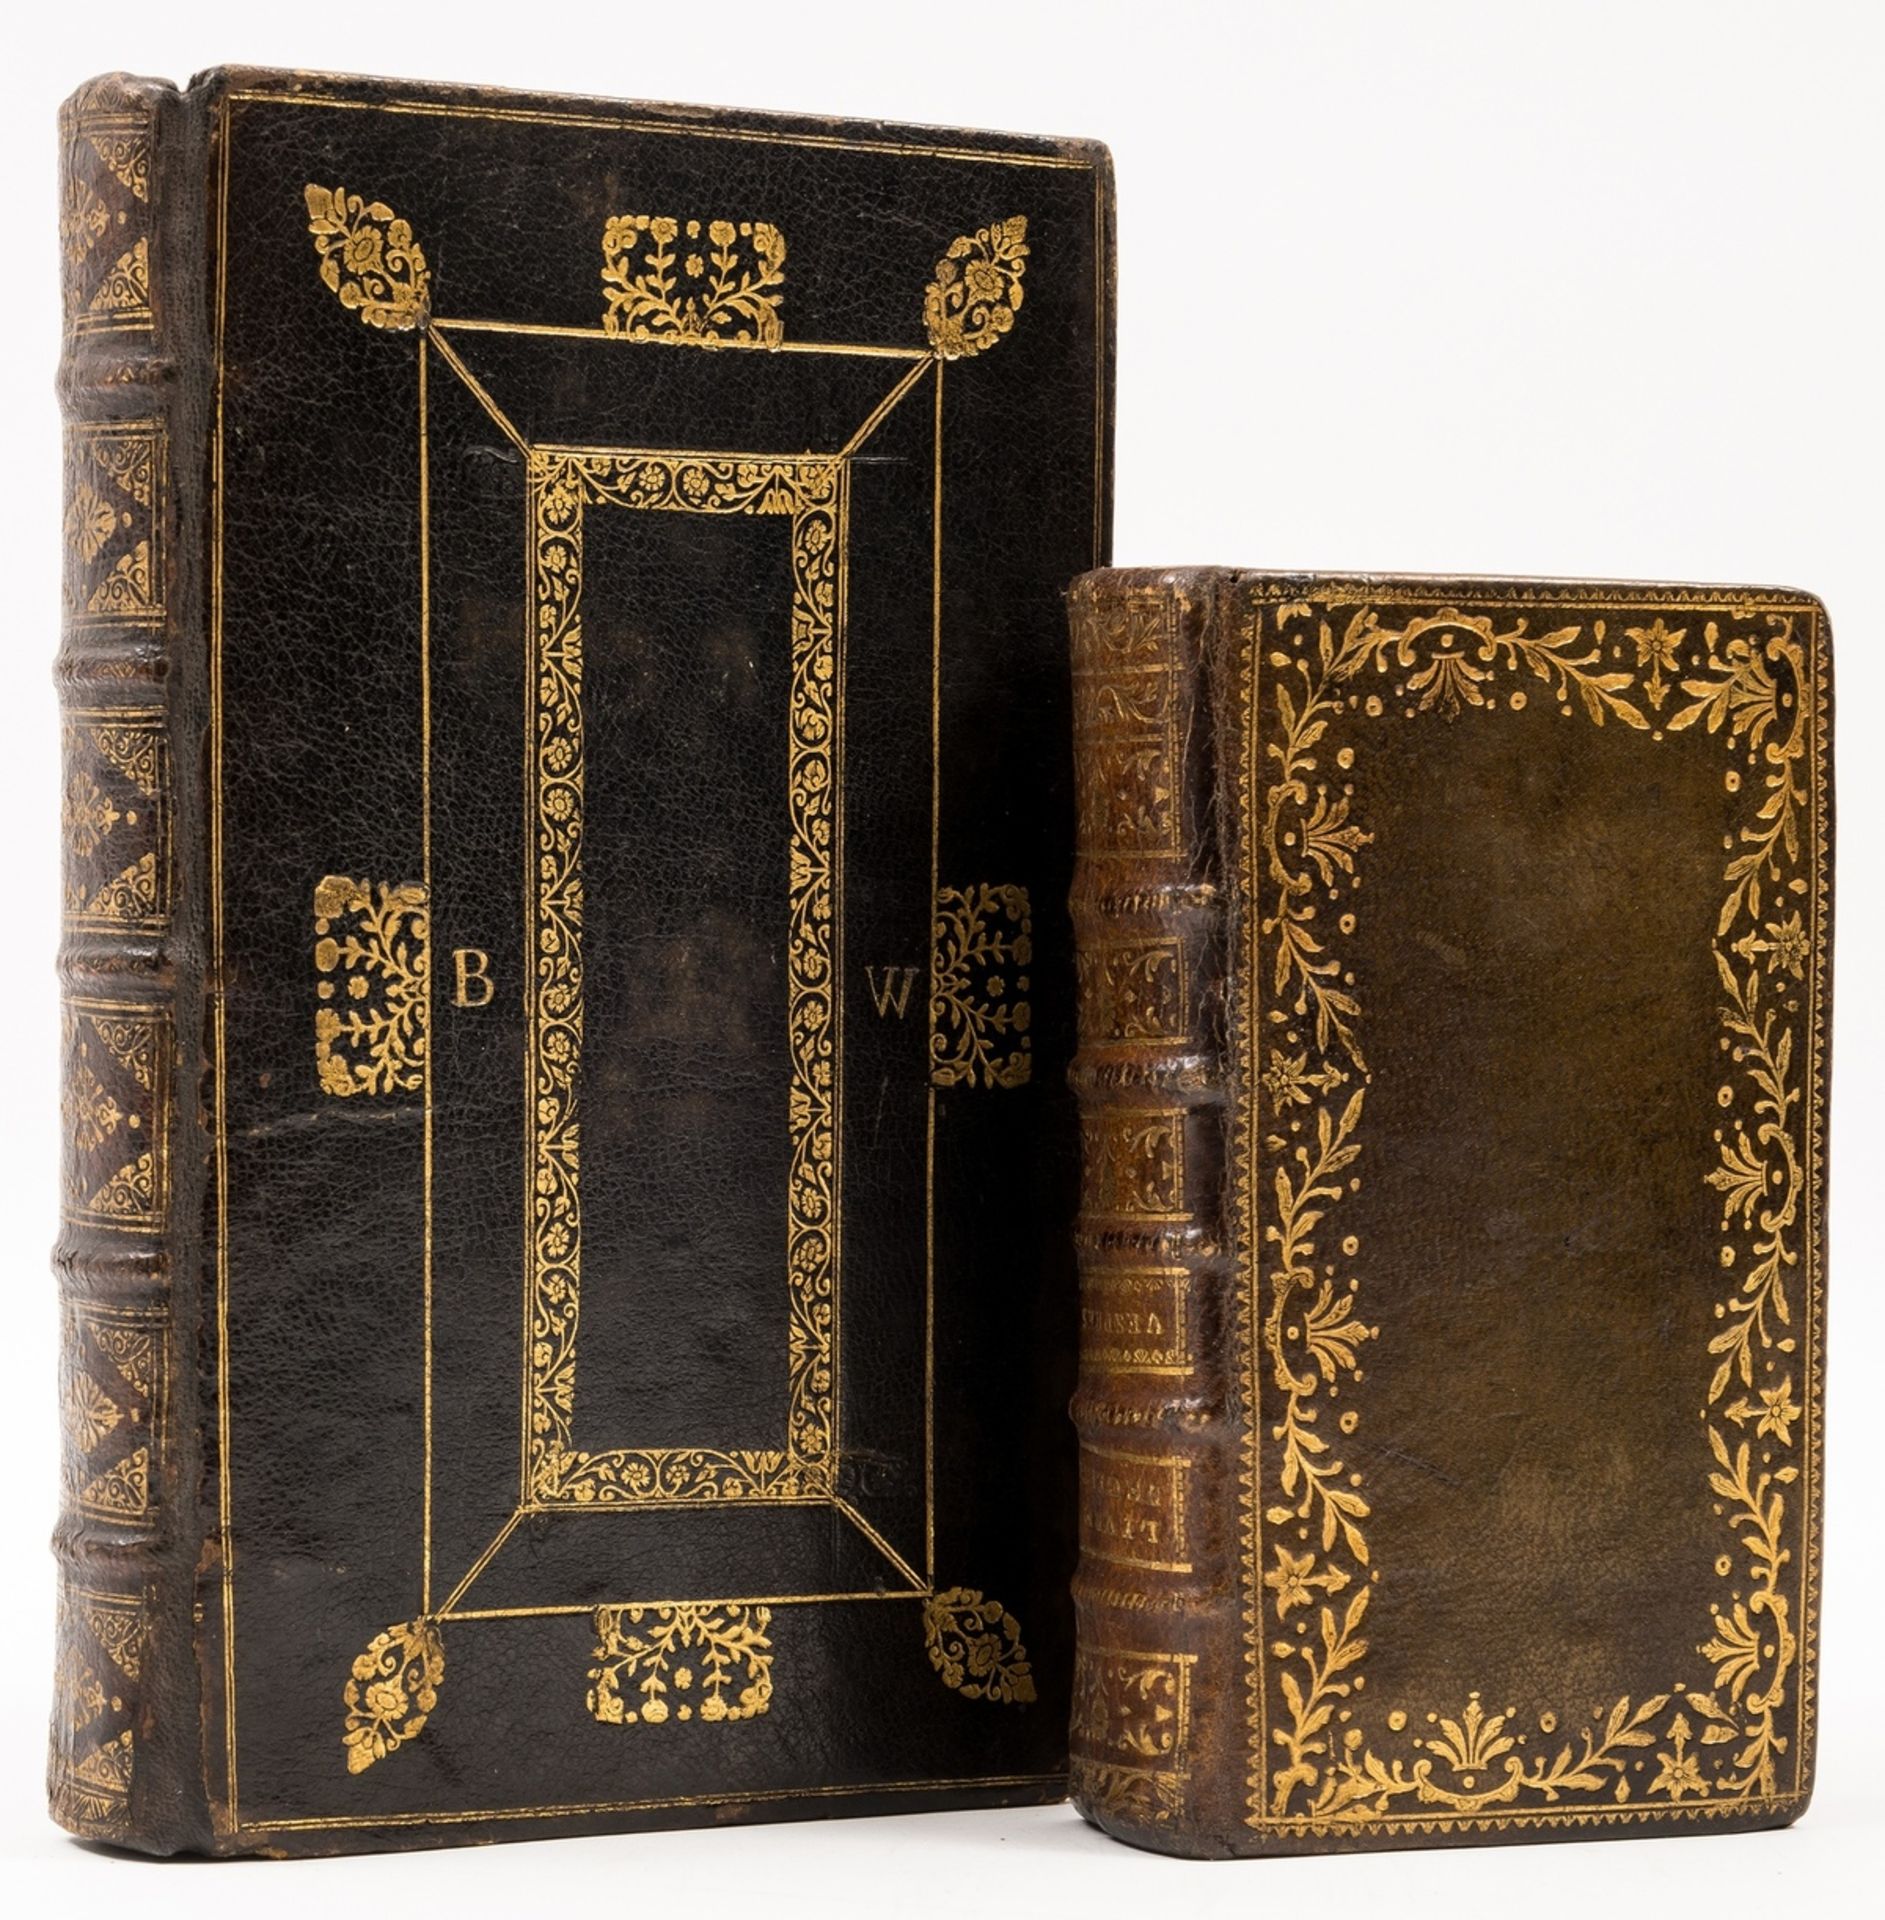 Bindings.- Bible, English.- The Whole book of Psalms, in contemporary black morocco, gilt, Company …